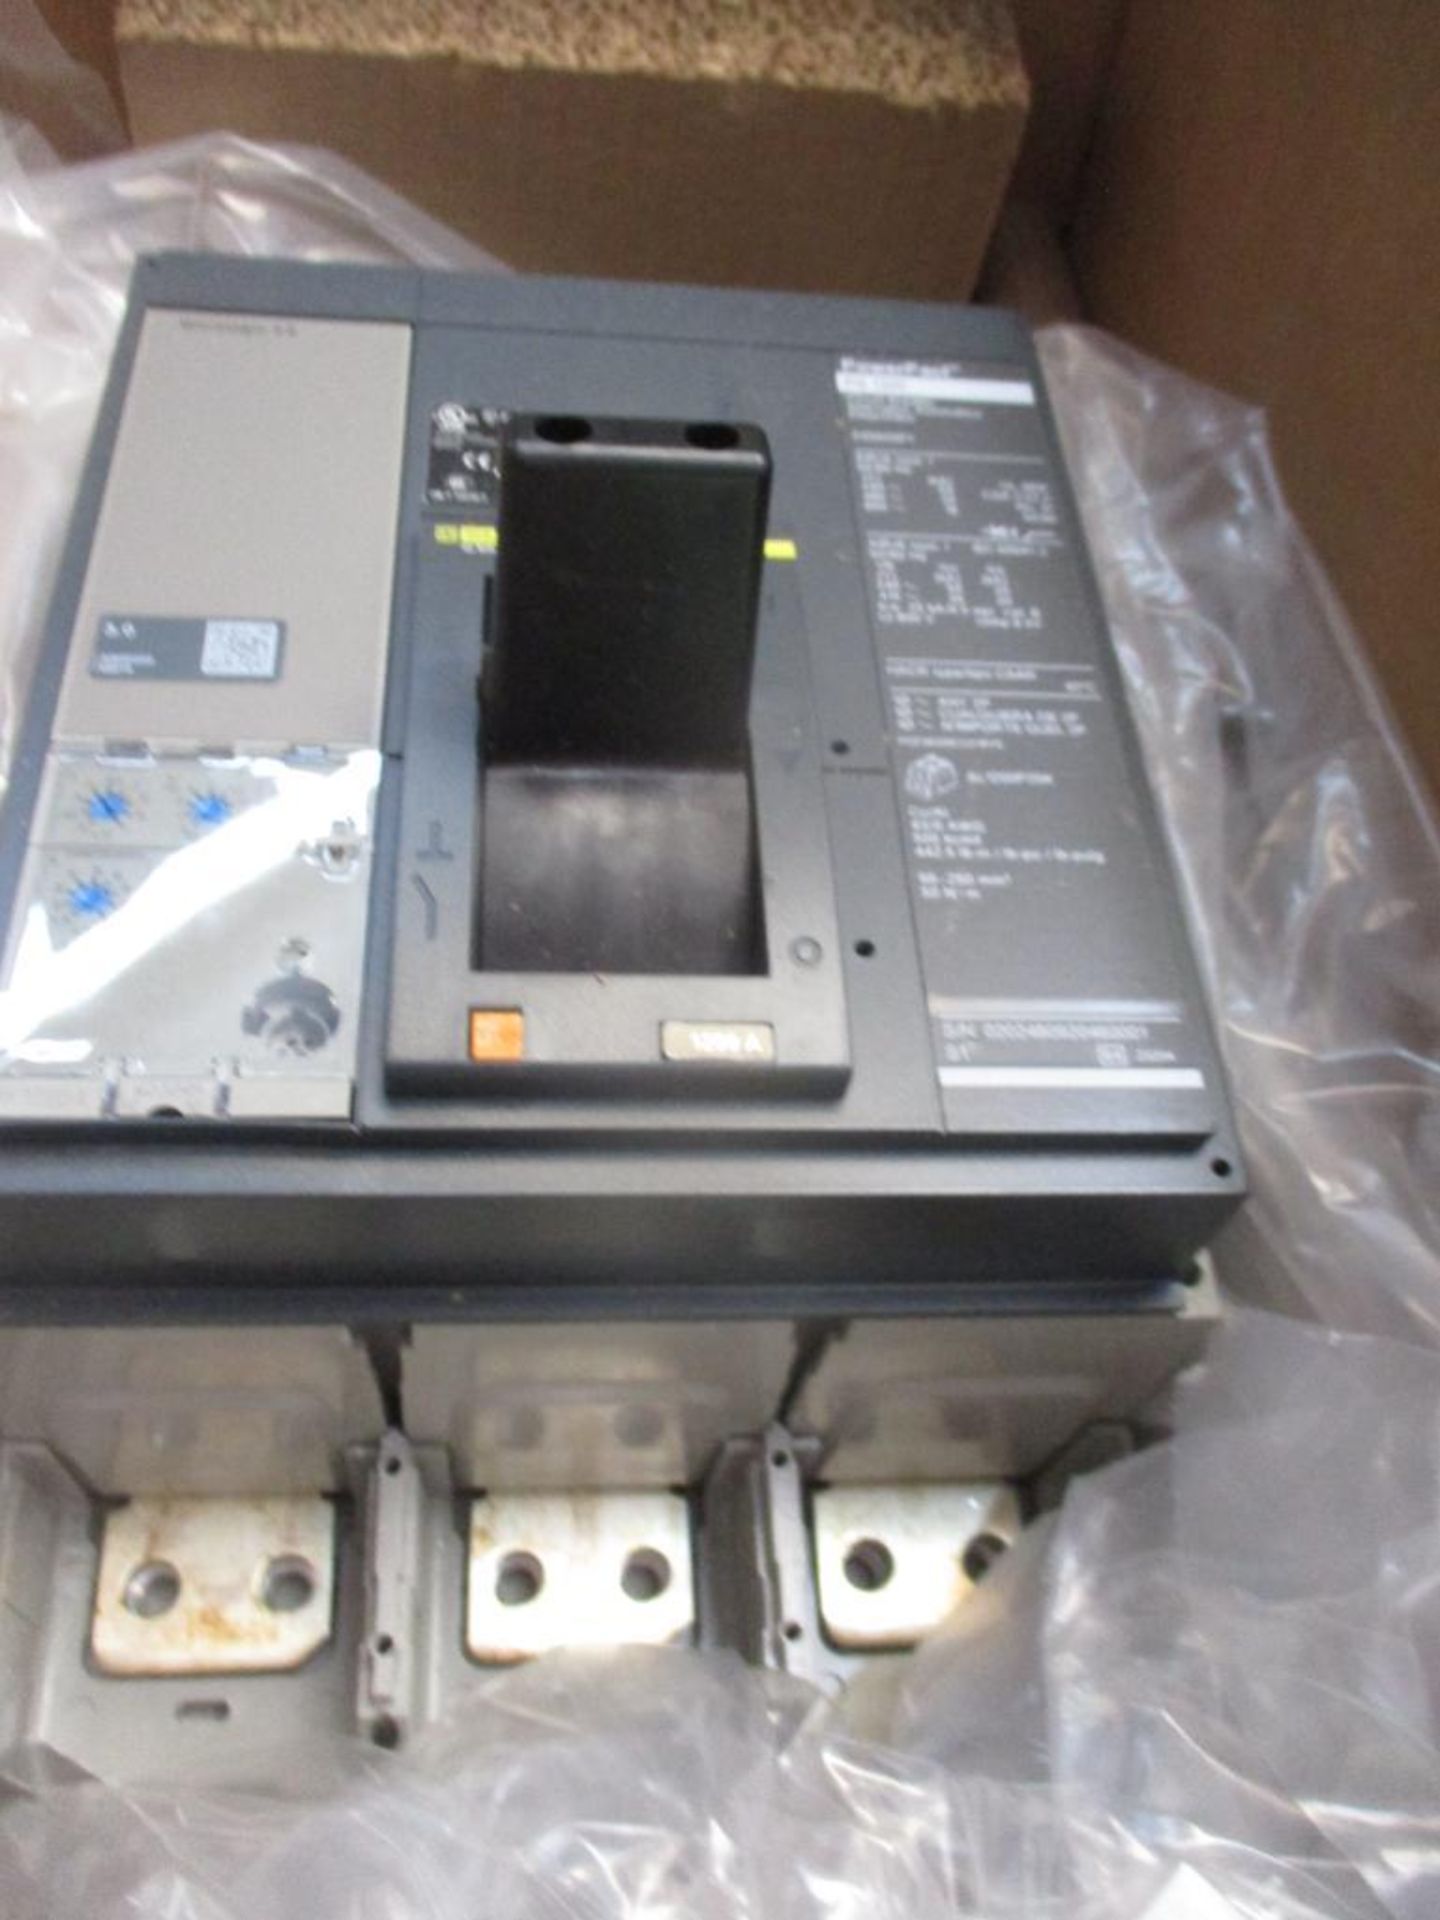 Square D 1200 AMP Circuit Breaker, 545920P1, 1200A, 3P, 600VAC, PG1200 (New in Box) - Image 2 of 4